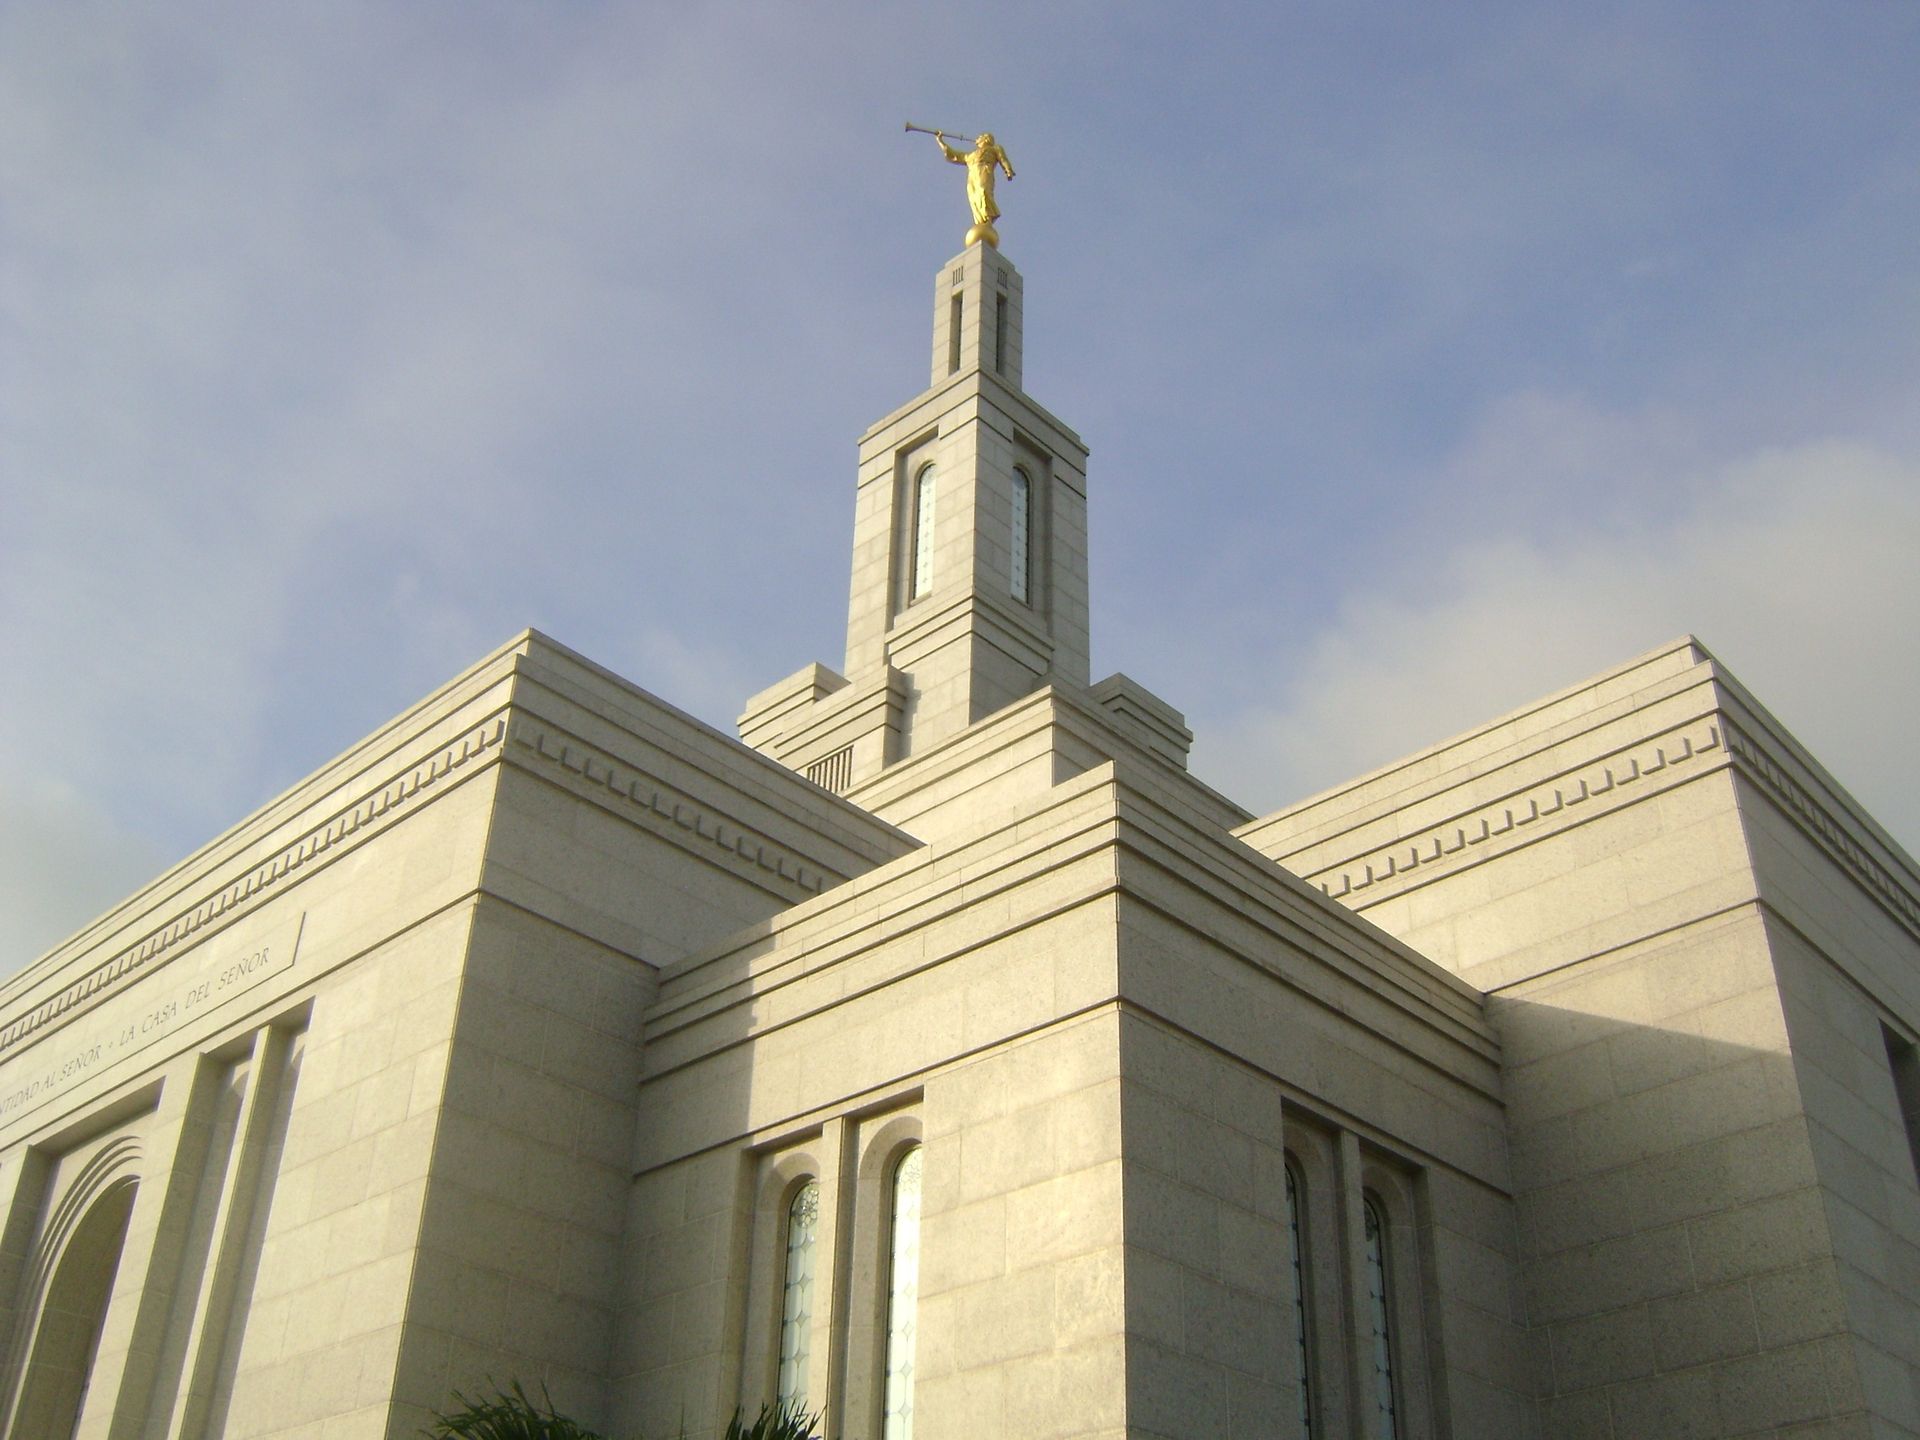 The Panama City Panama Temple spire, including the exterior and scenery.